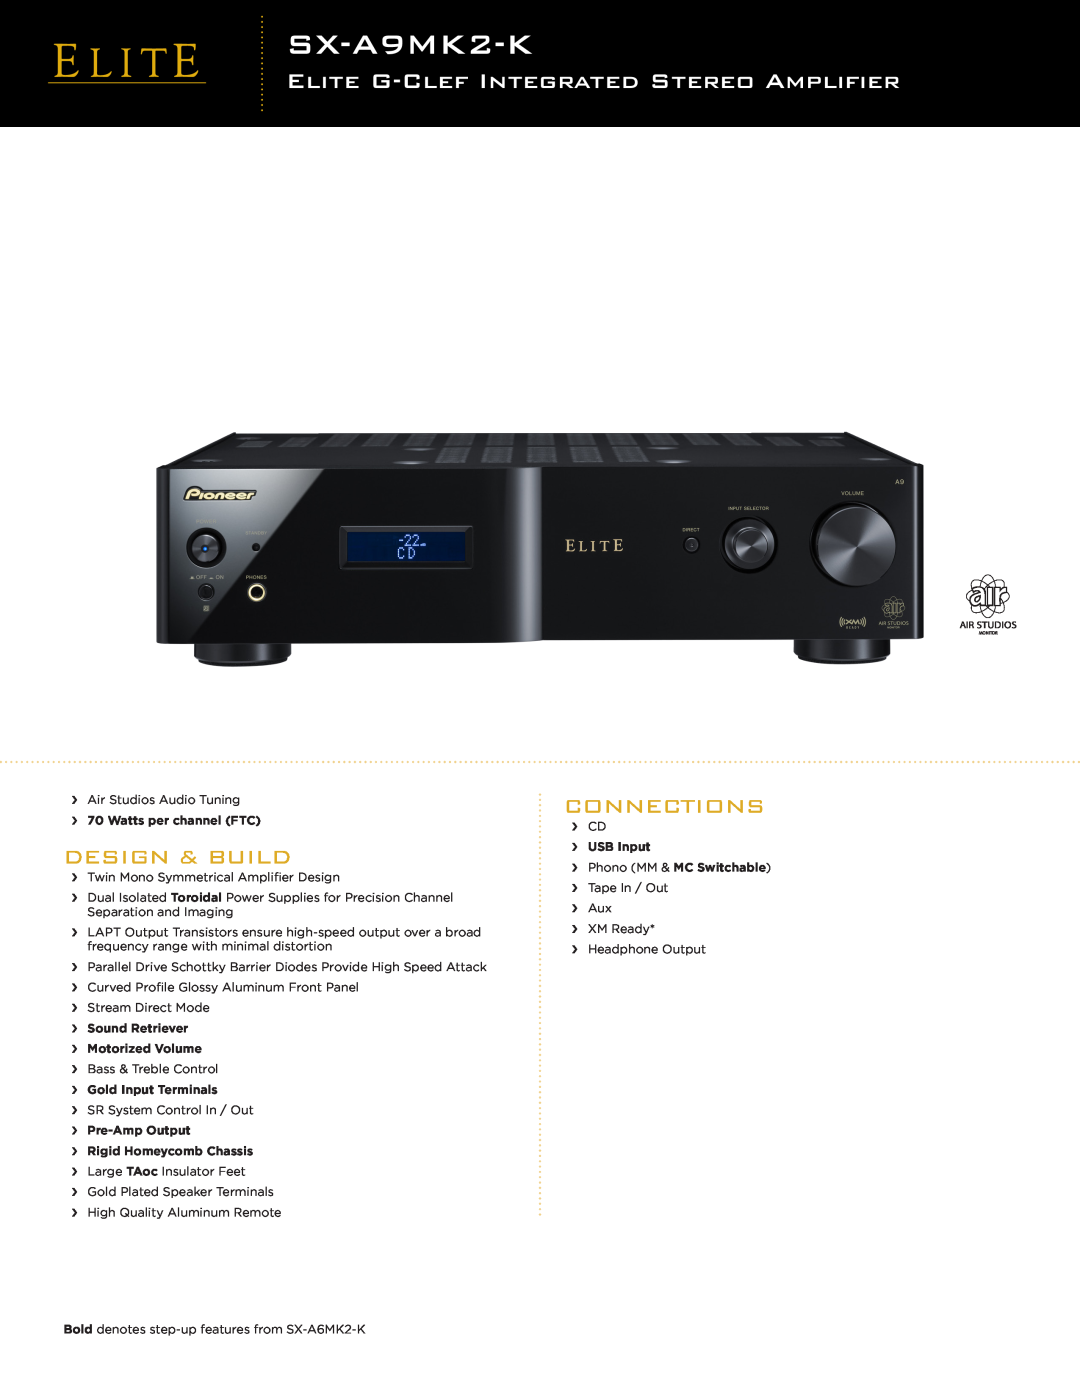 Pioneer SX-A9MK2-K manual Elite G-Clefintegrated Stereo Amplifier, Design & Build, Connections, ›› Motorized Volume 